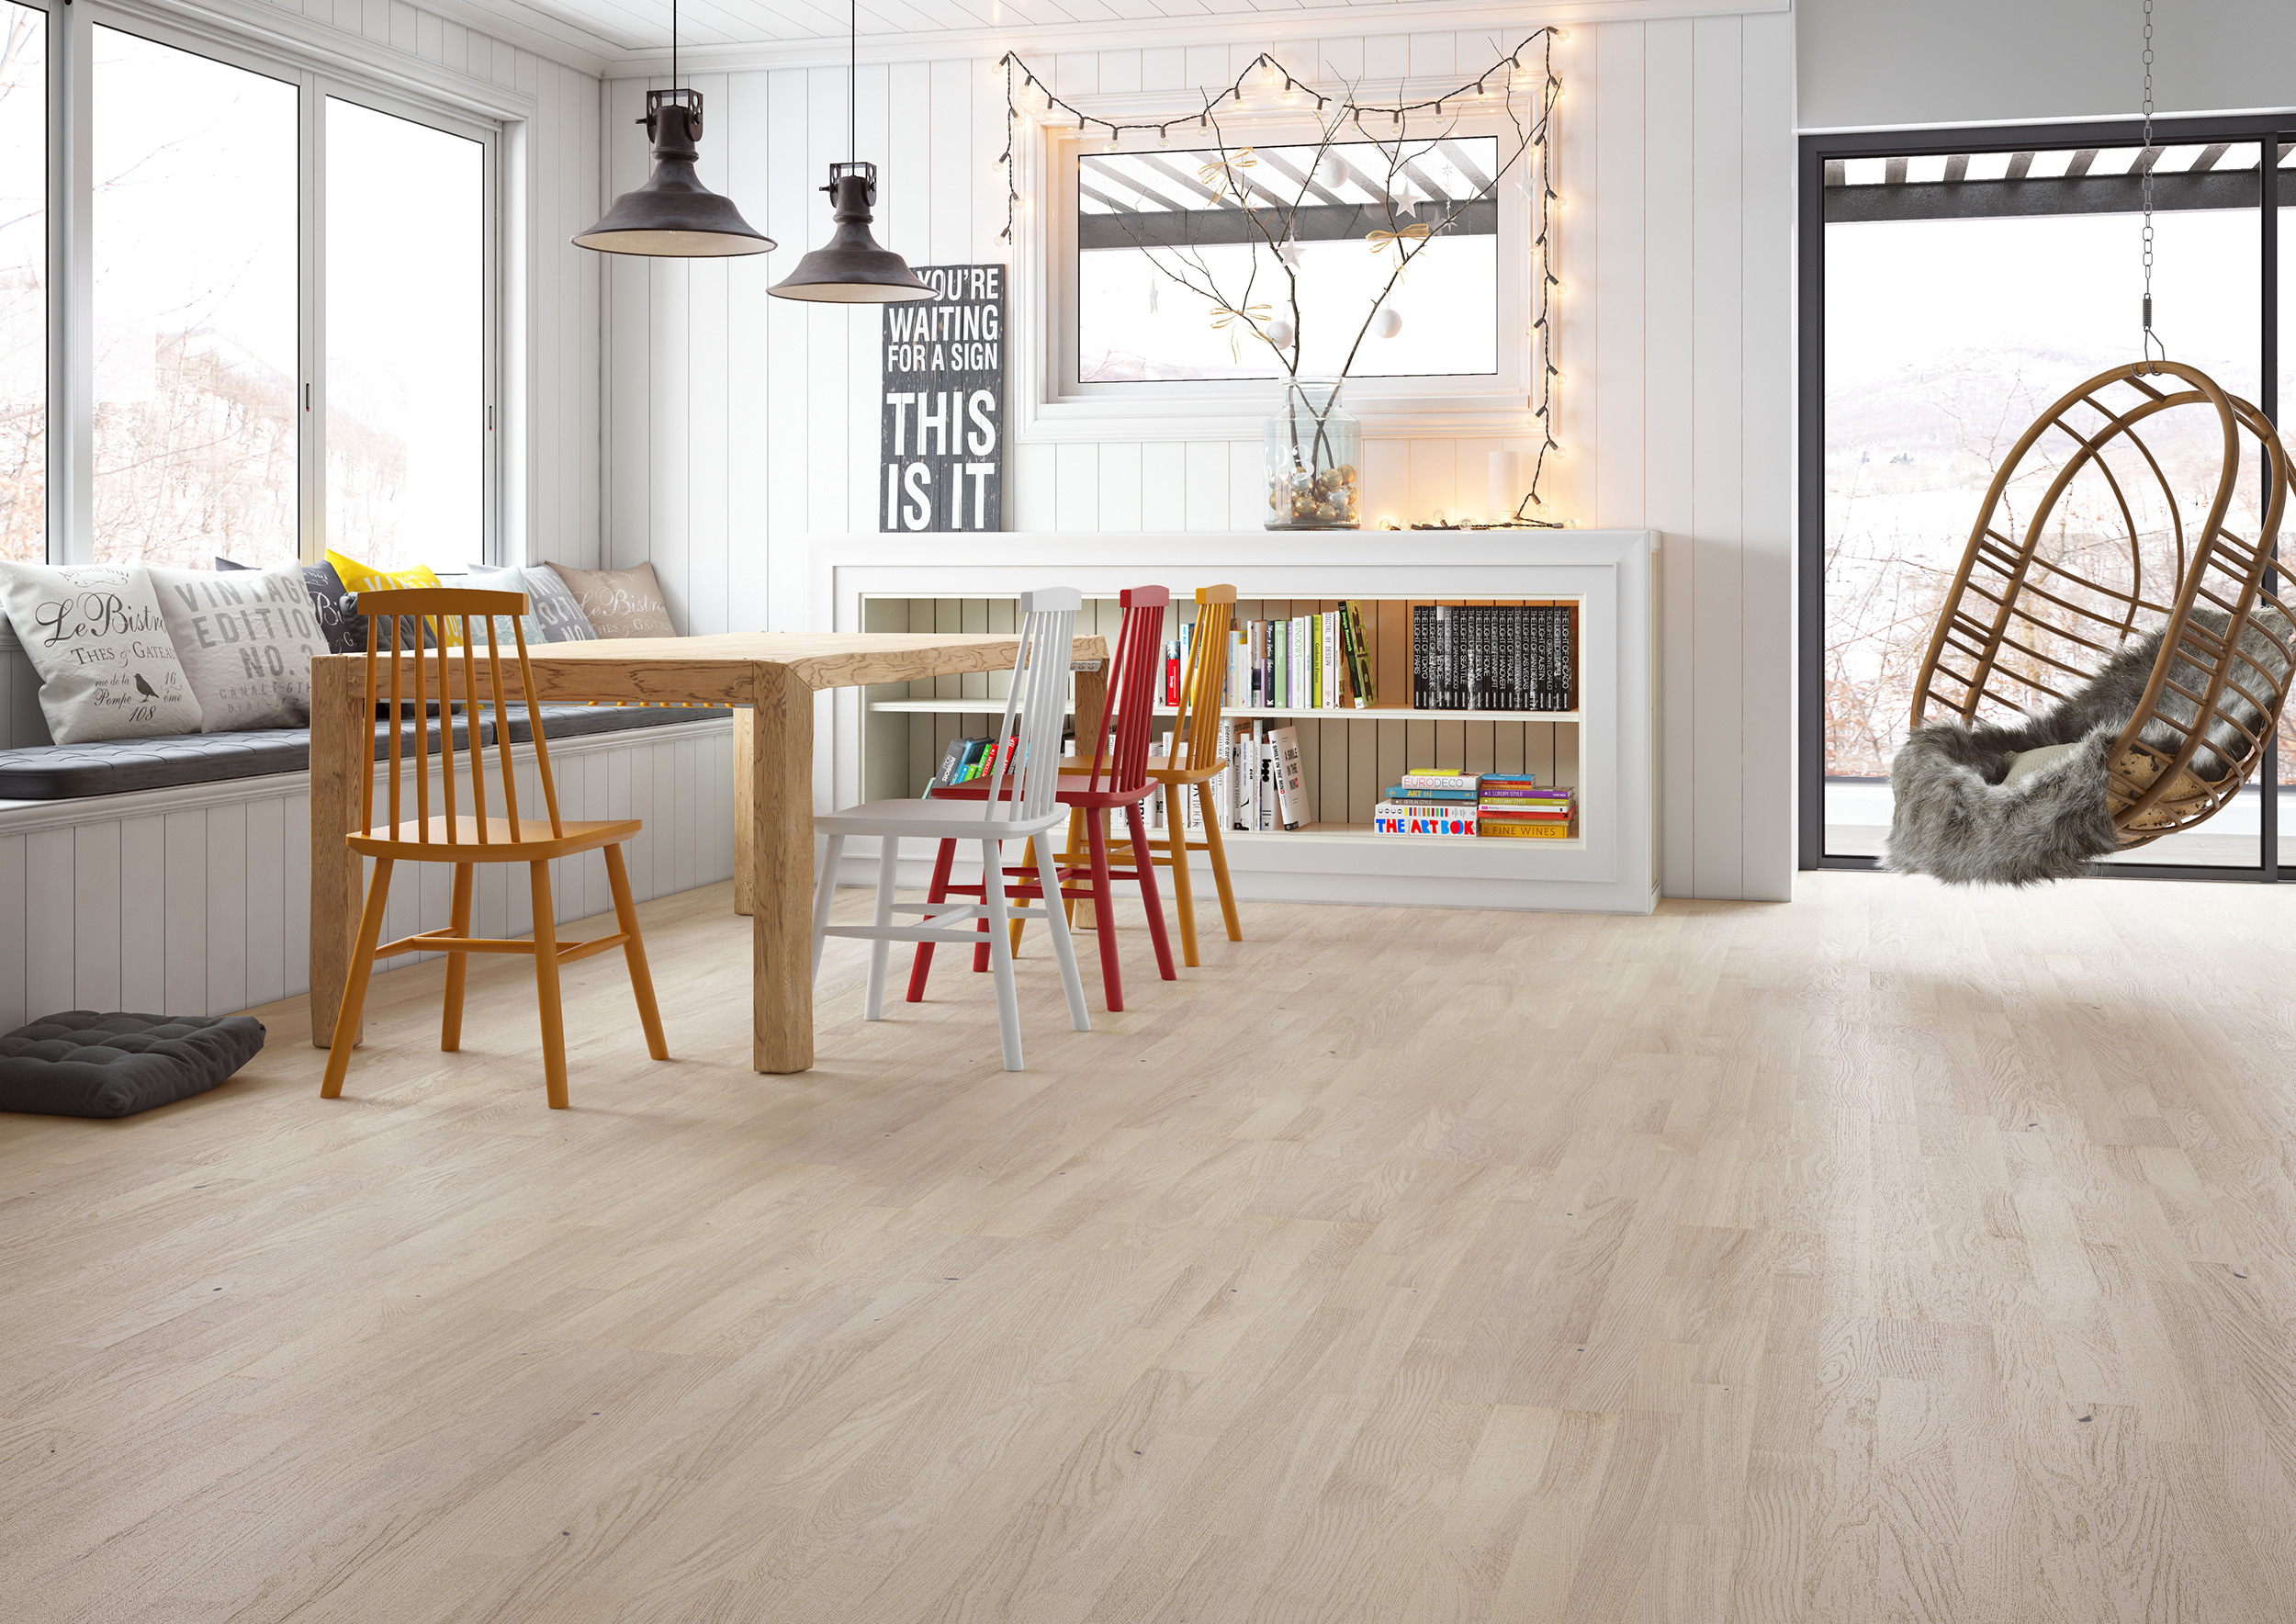 Are Light Wood Floors in Style 